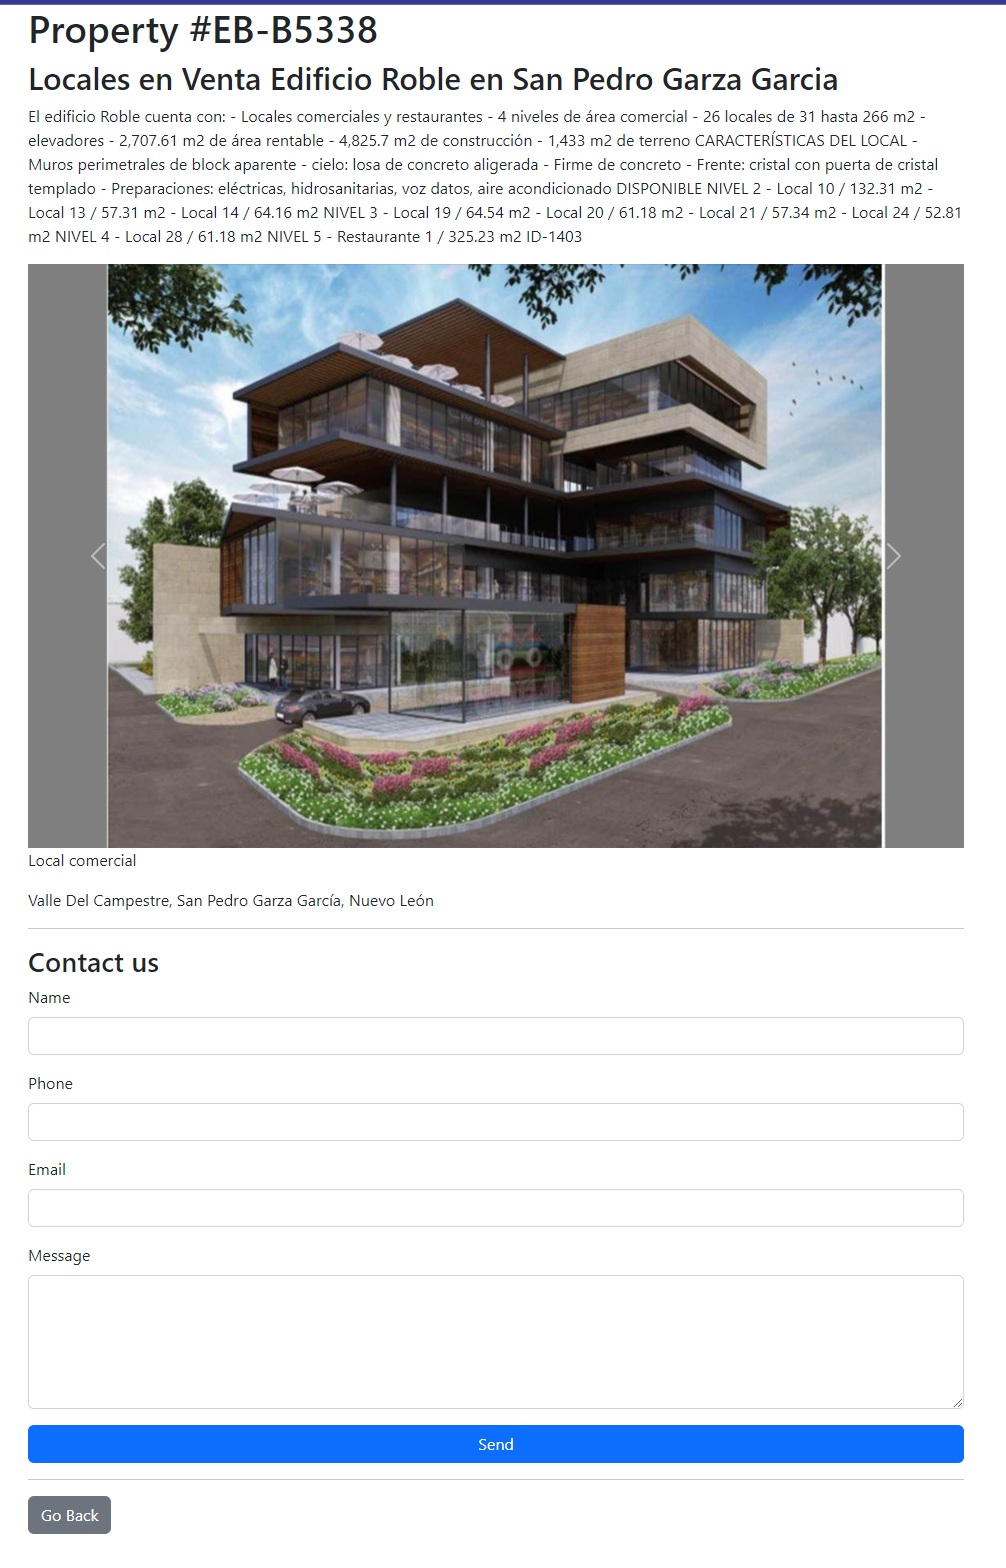 Property page and contact form